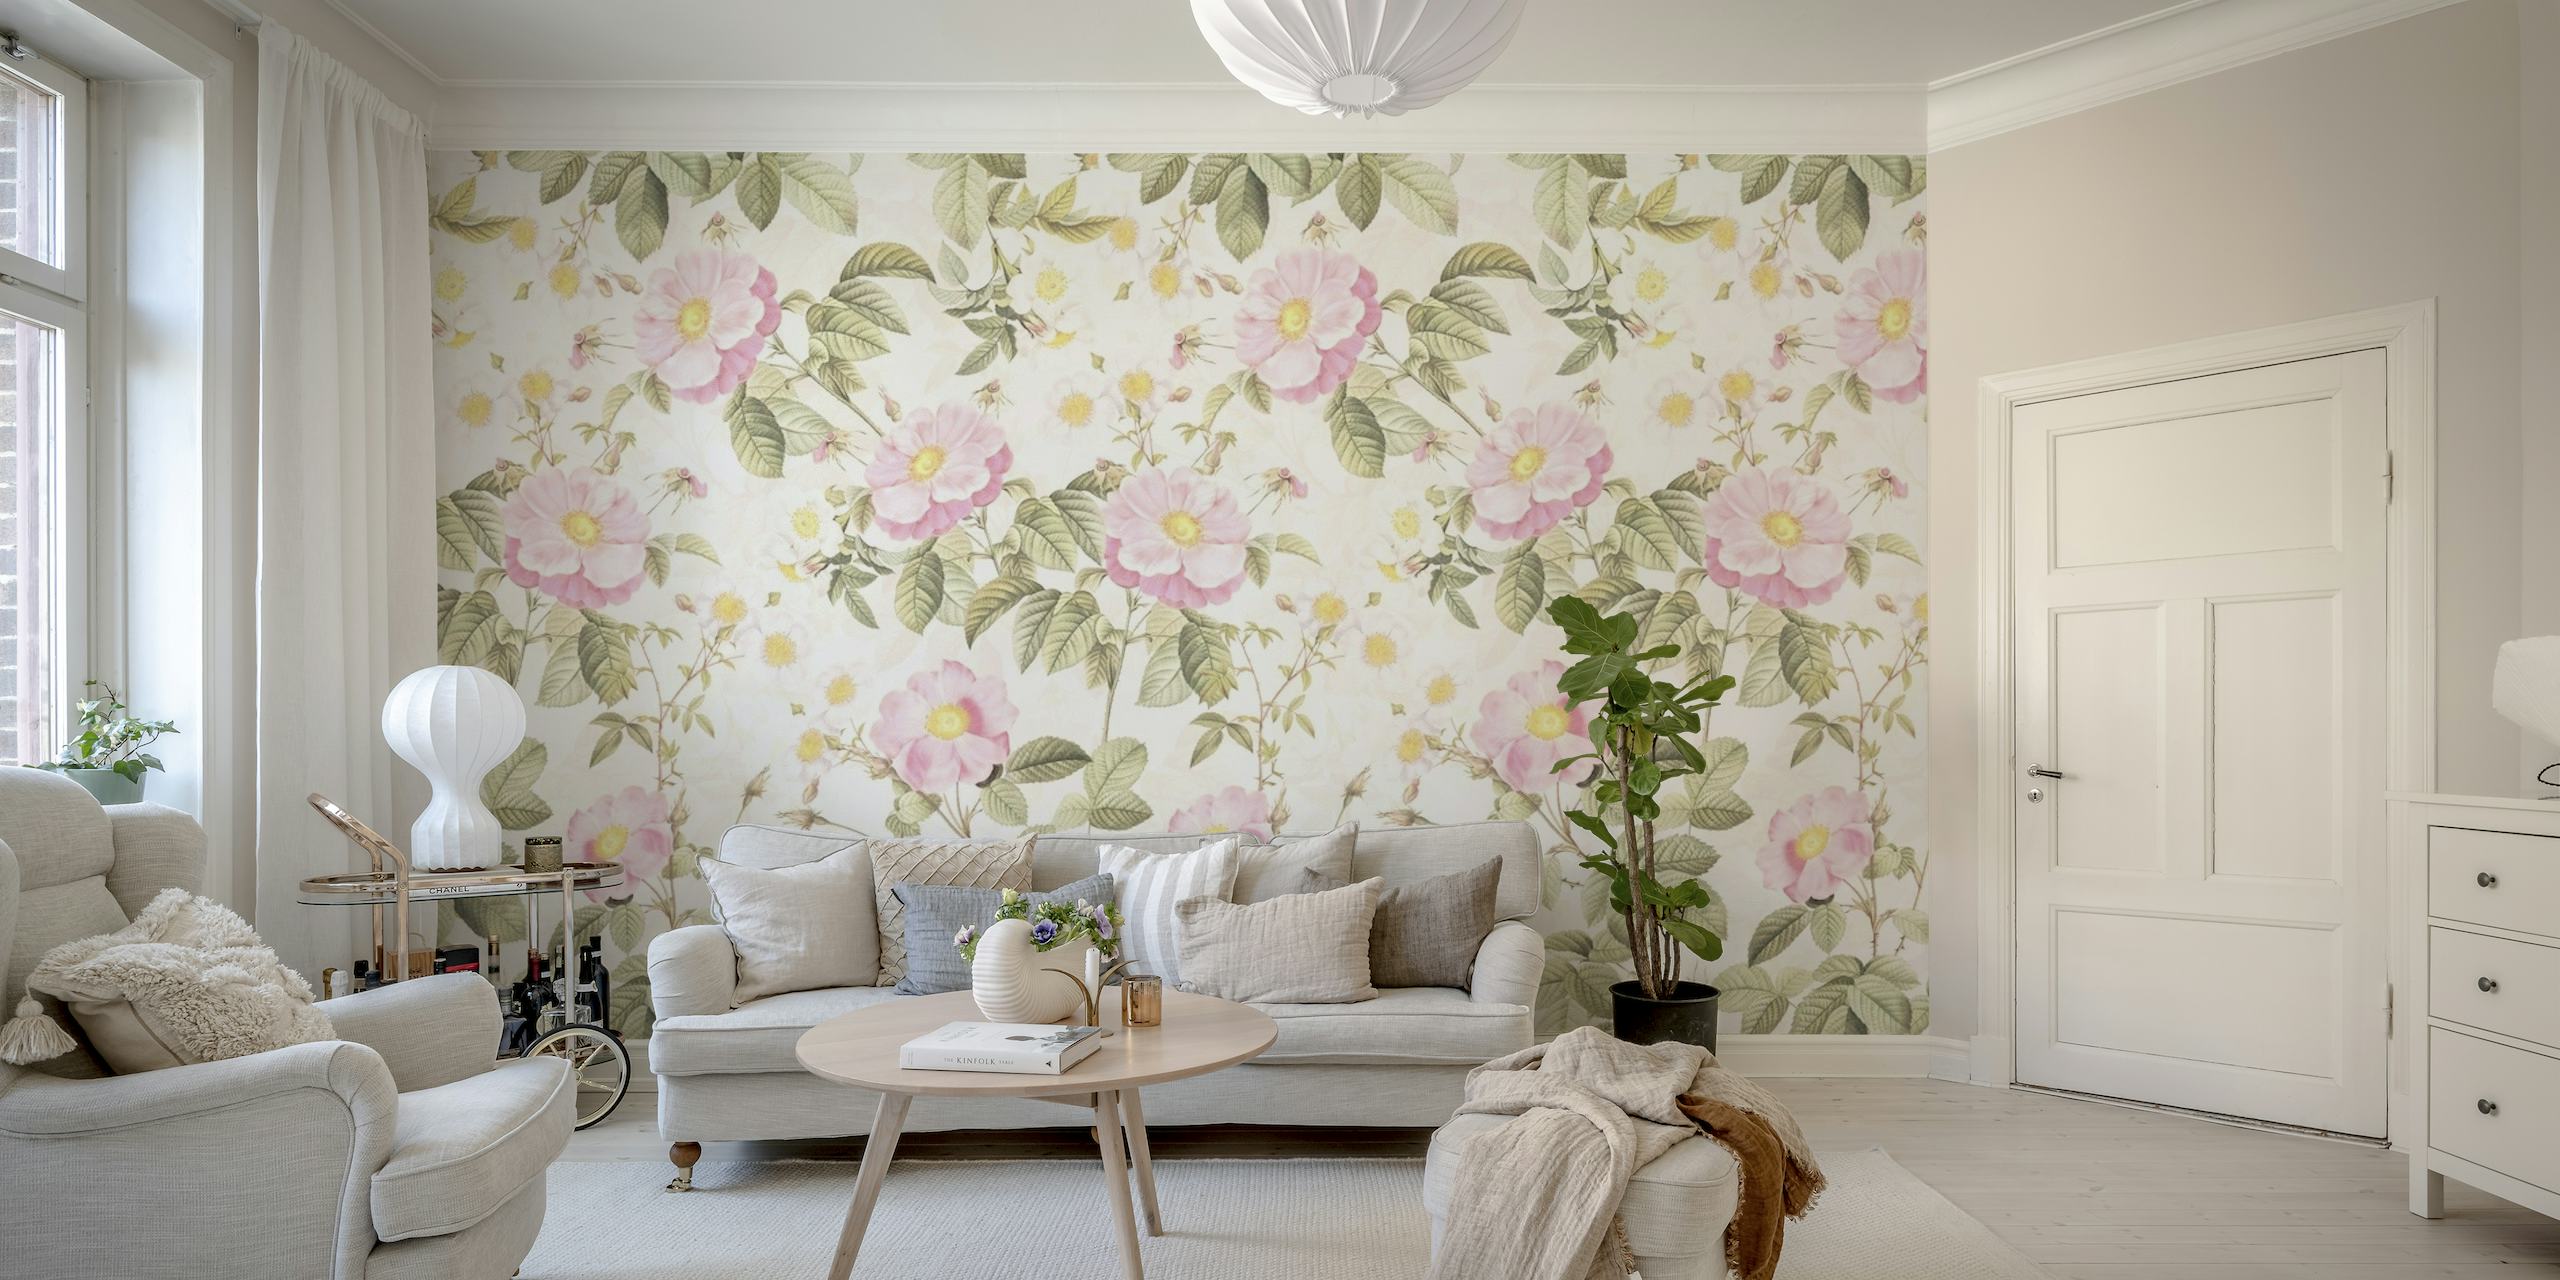 Redoute Roses Garden 2 wall mural with pastel pink roses and green leaves.